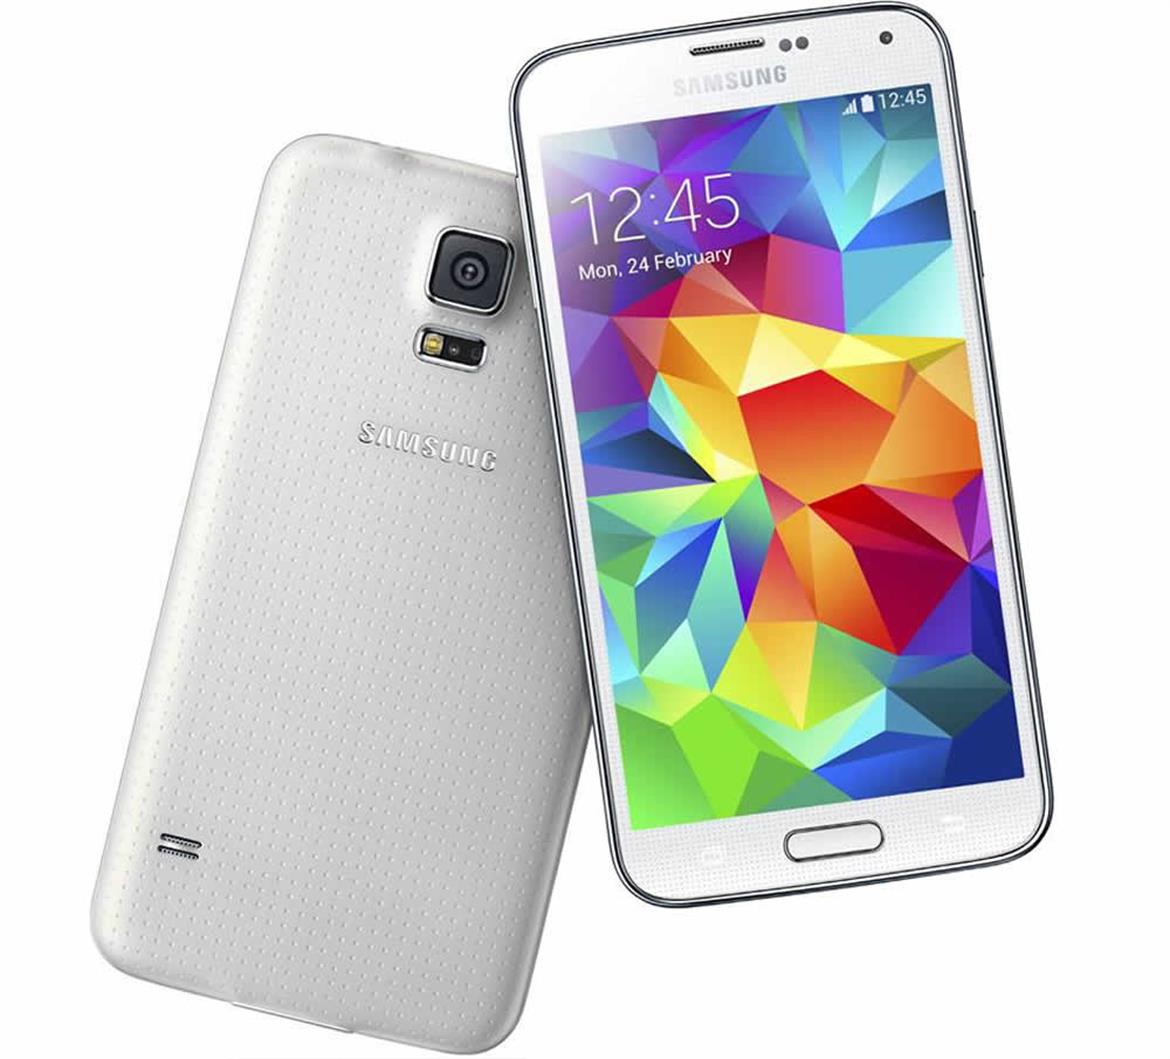 Samsung Galaxy S5 Mini Hits AT&T Networks March 20 With Questionable $429 Price Tag